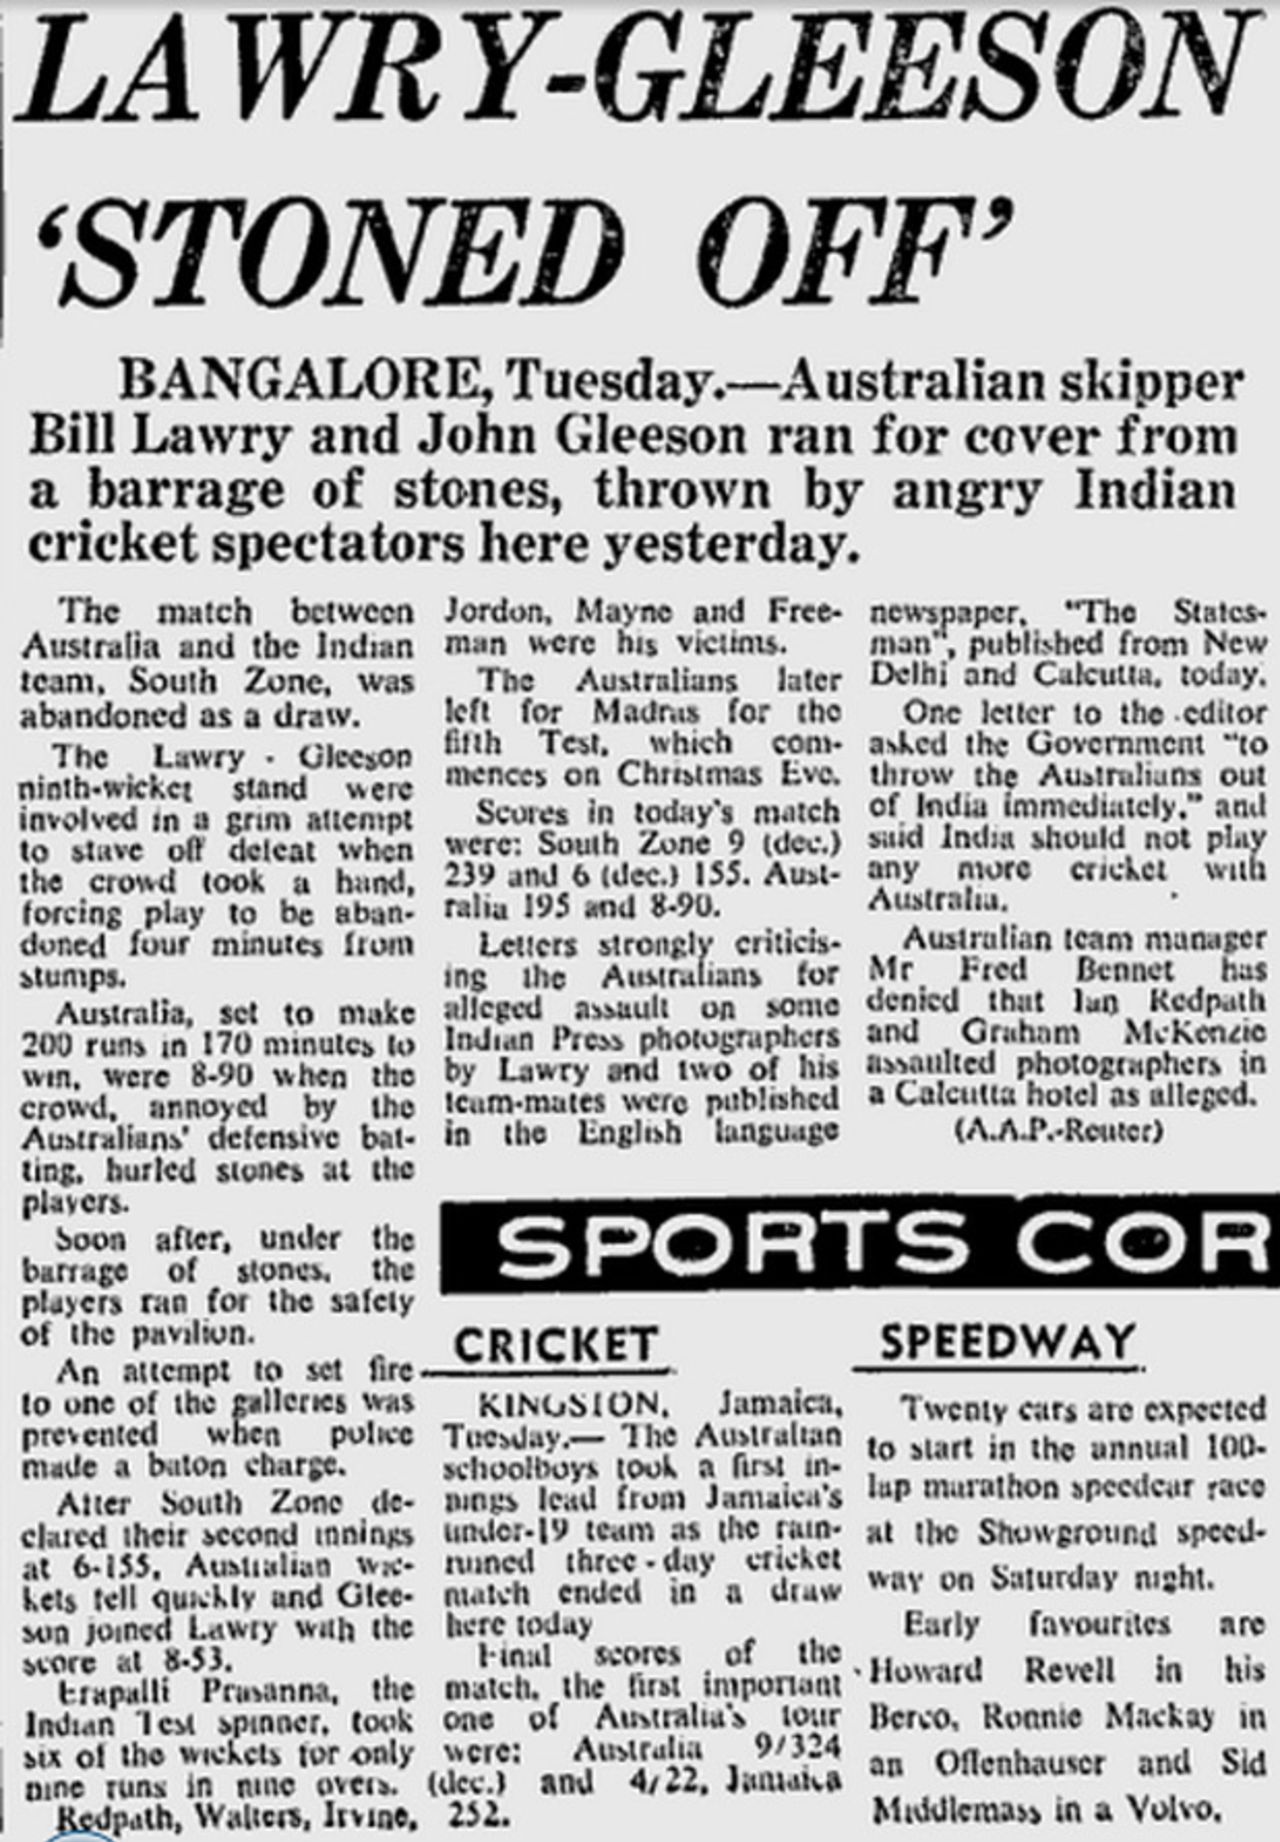 The <i>Sydney Morning Herald</i> reports on the crowd trouble that ended the tour game between South Zone and the Australians in Bangalore, December 23, 1969